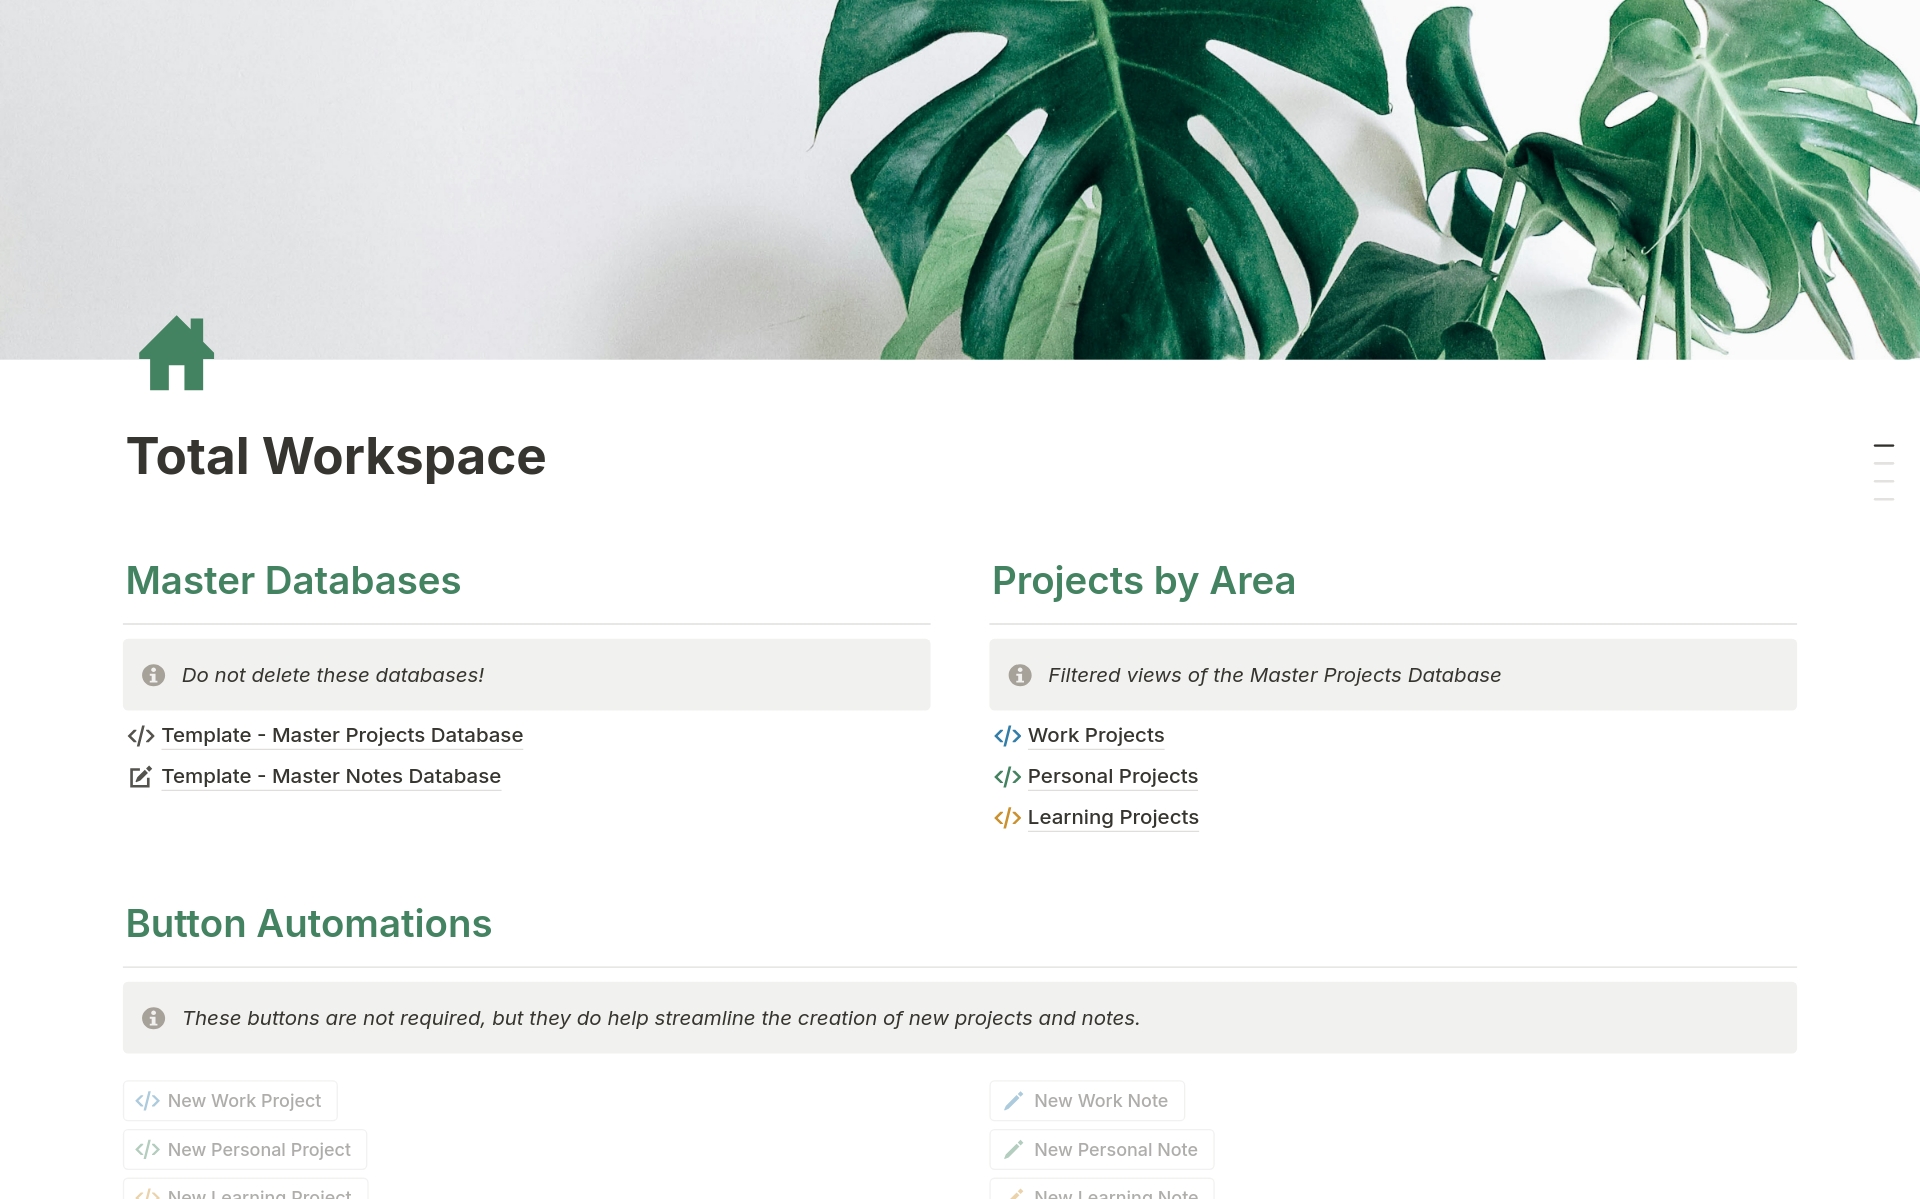 Total workspace framework for organizing life areas, projects, and related notes.